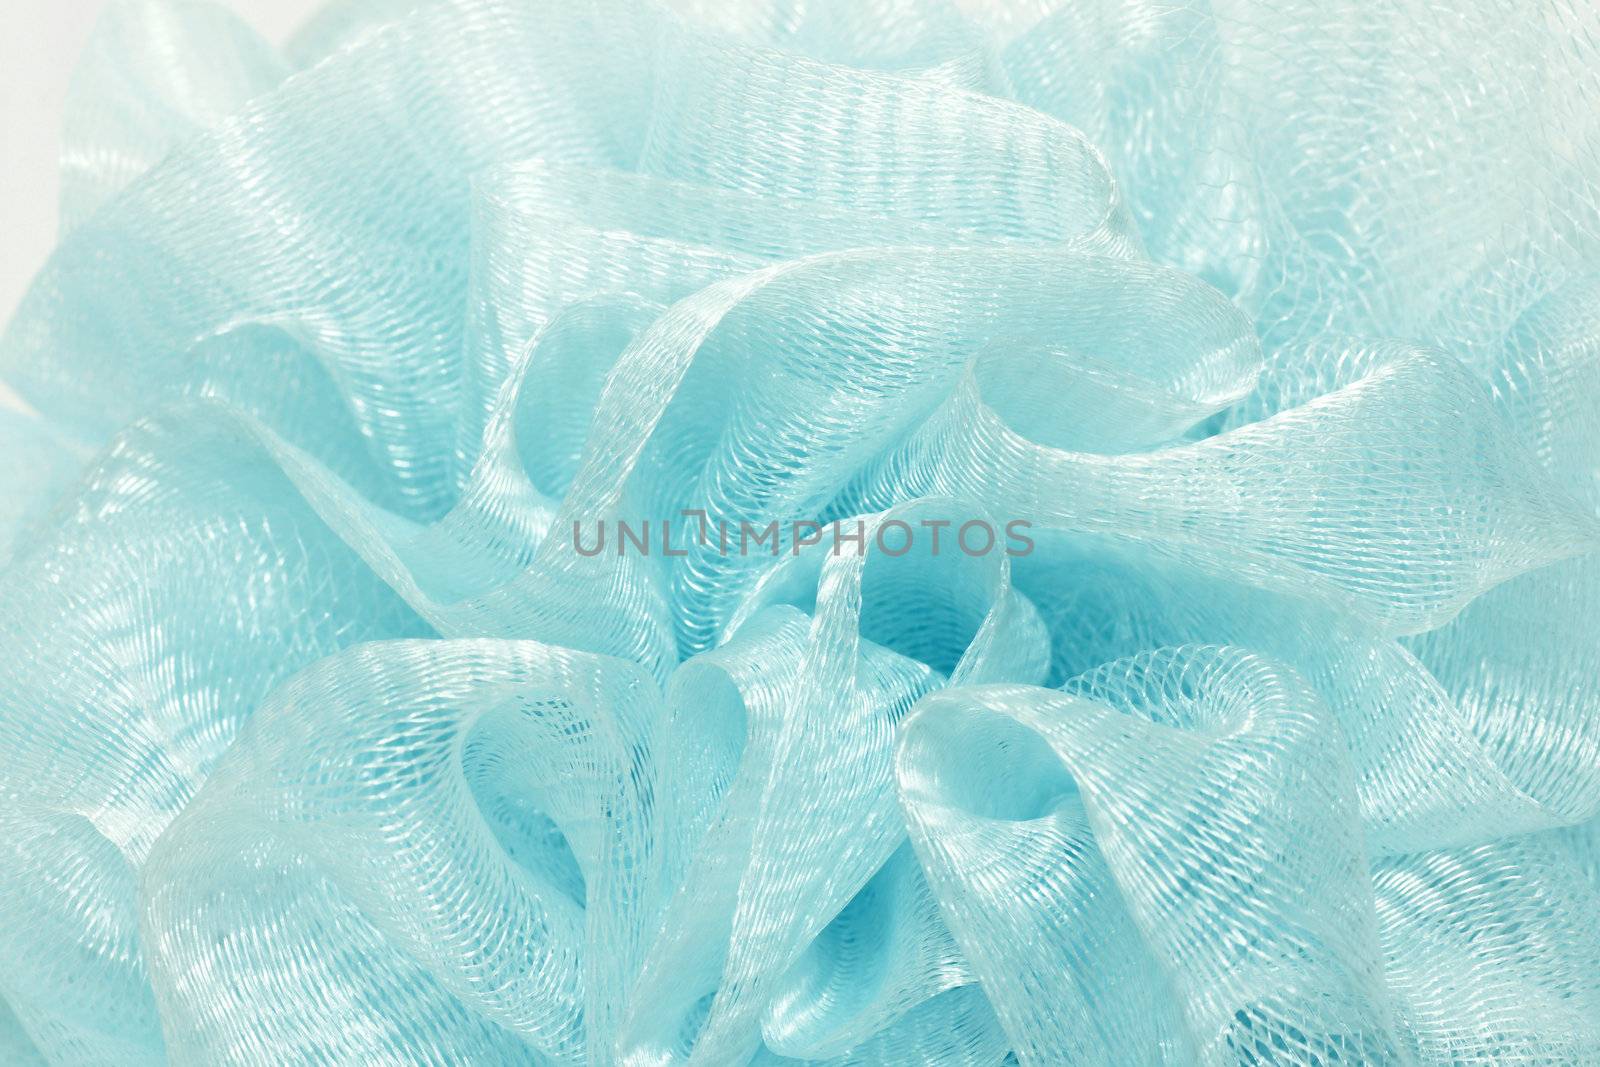 Textured background abstract: detailed macro of alight blue shower puff made of meshed nylon forming multiple diamond shape patterns.